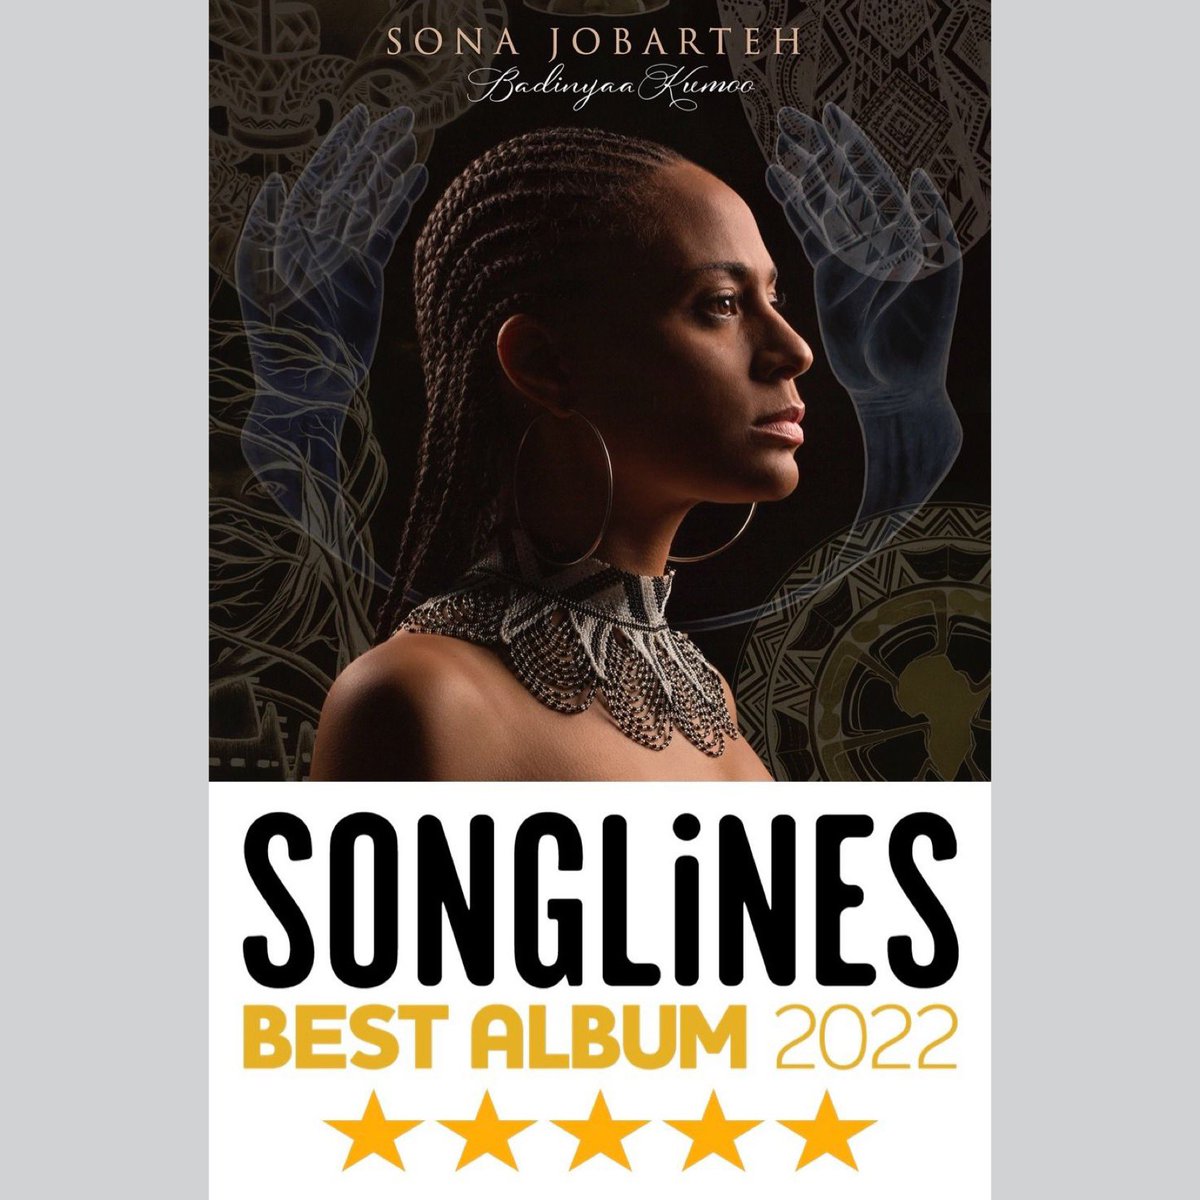 I'm super happy and honoured to be featured in Songlines Magazine for the 'Best Album 2022' with my new album Badinyaa Kumoo!! Thank you! 🙏🏾 #songlines #songlinesmagazine #badinyaakumoo